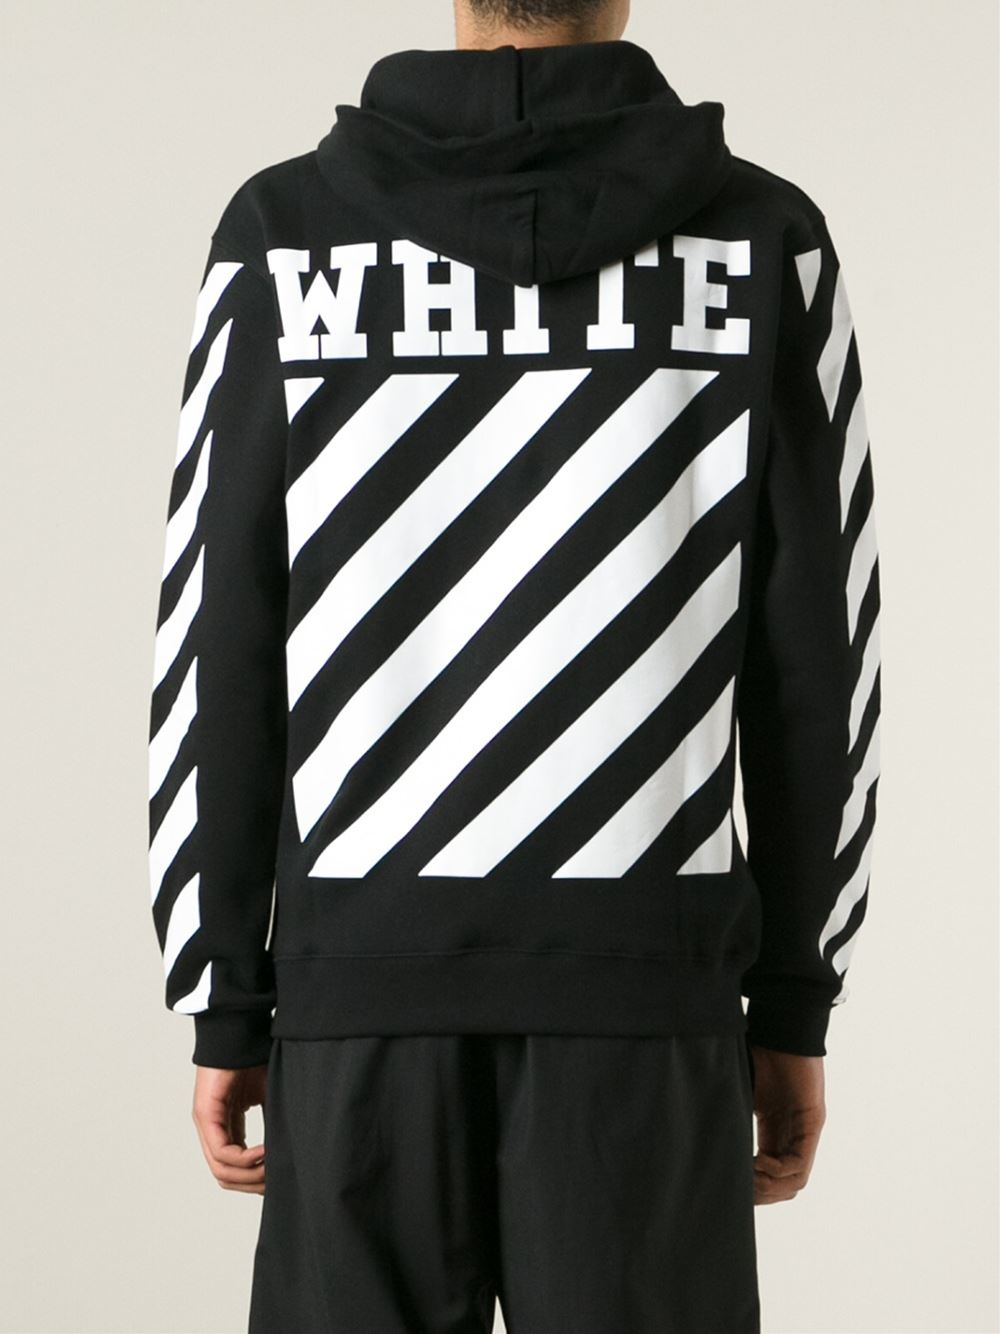 Off-White c/o Virgil Abloh 'New Caravaggio' Hoodie in Black for Men - Lyst